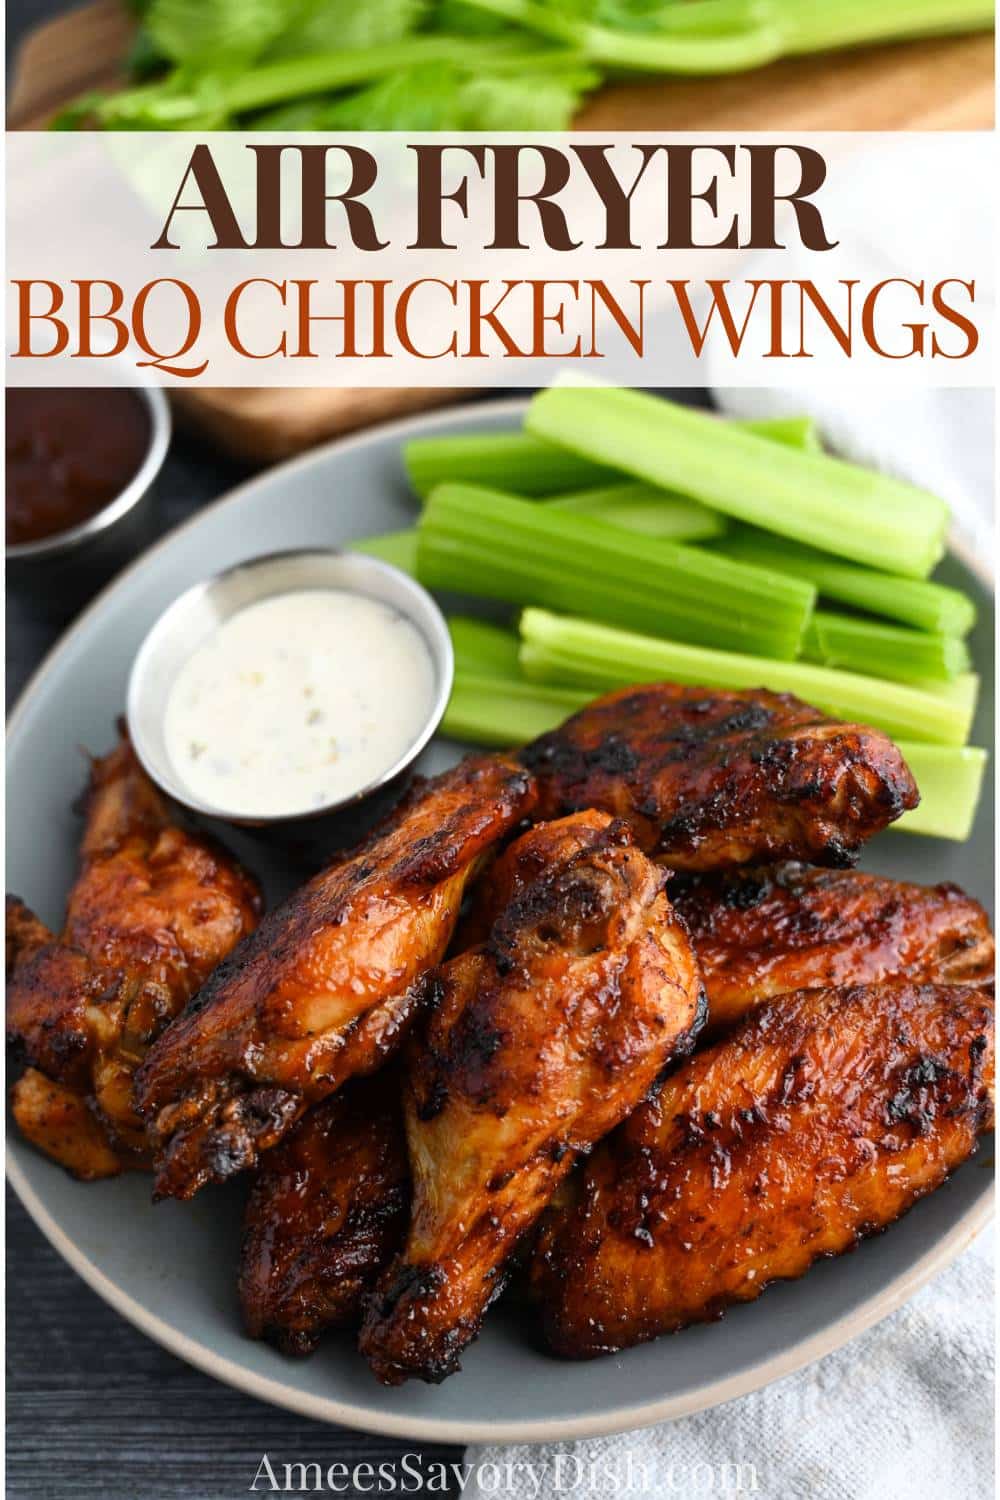 These Air Fryer BBQ Chicken Wings are a must-make on game day-flavorful, ridiculously juicy party wings no one can resist! via @Ameessavorydish